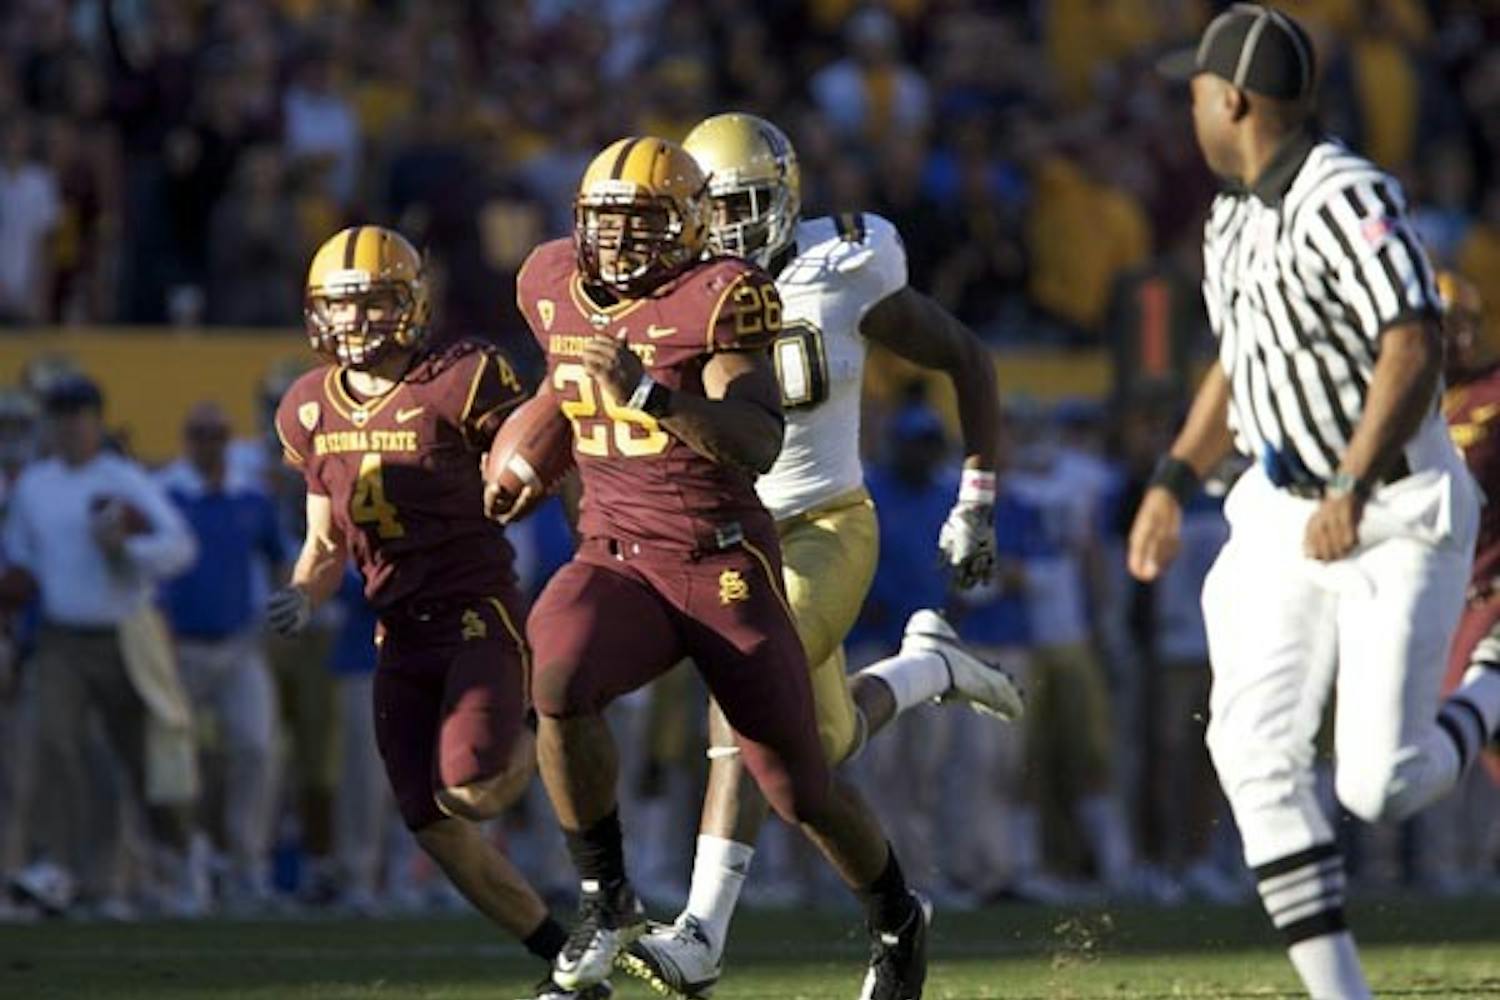 Breakaway: ASU sophomore Cameron Marshall sprints away from the UCLA defenders during the teams 55-34 victory over the Bruins. Marshall finished with 148 yards in the game, including a 71-yard touchdown run. (Photo by Scott Stuk)